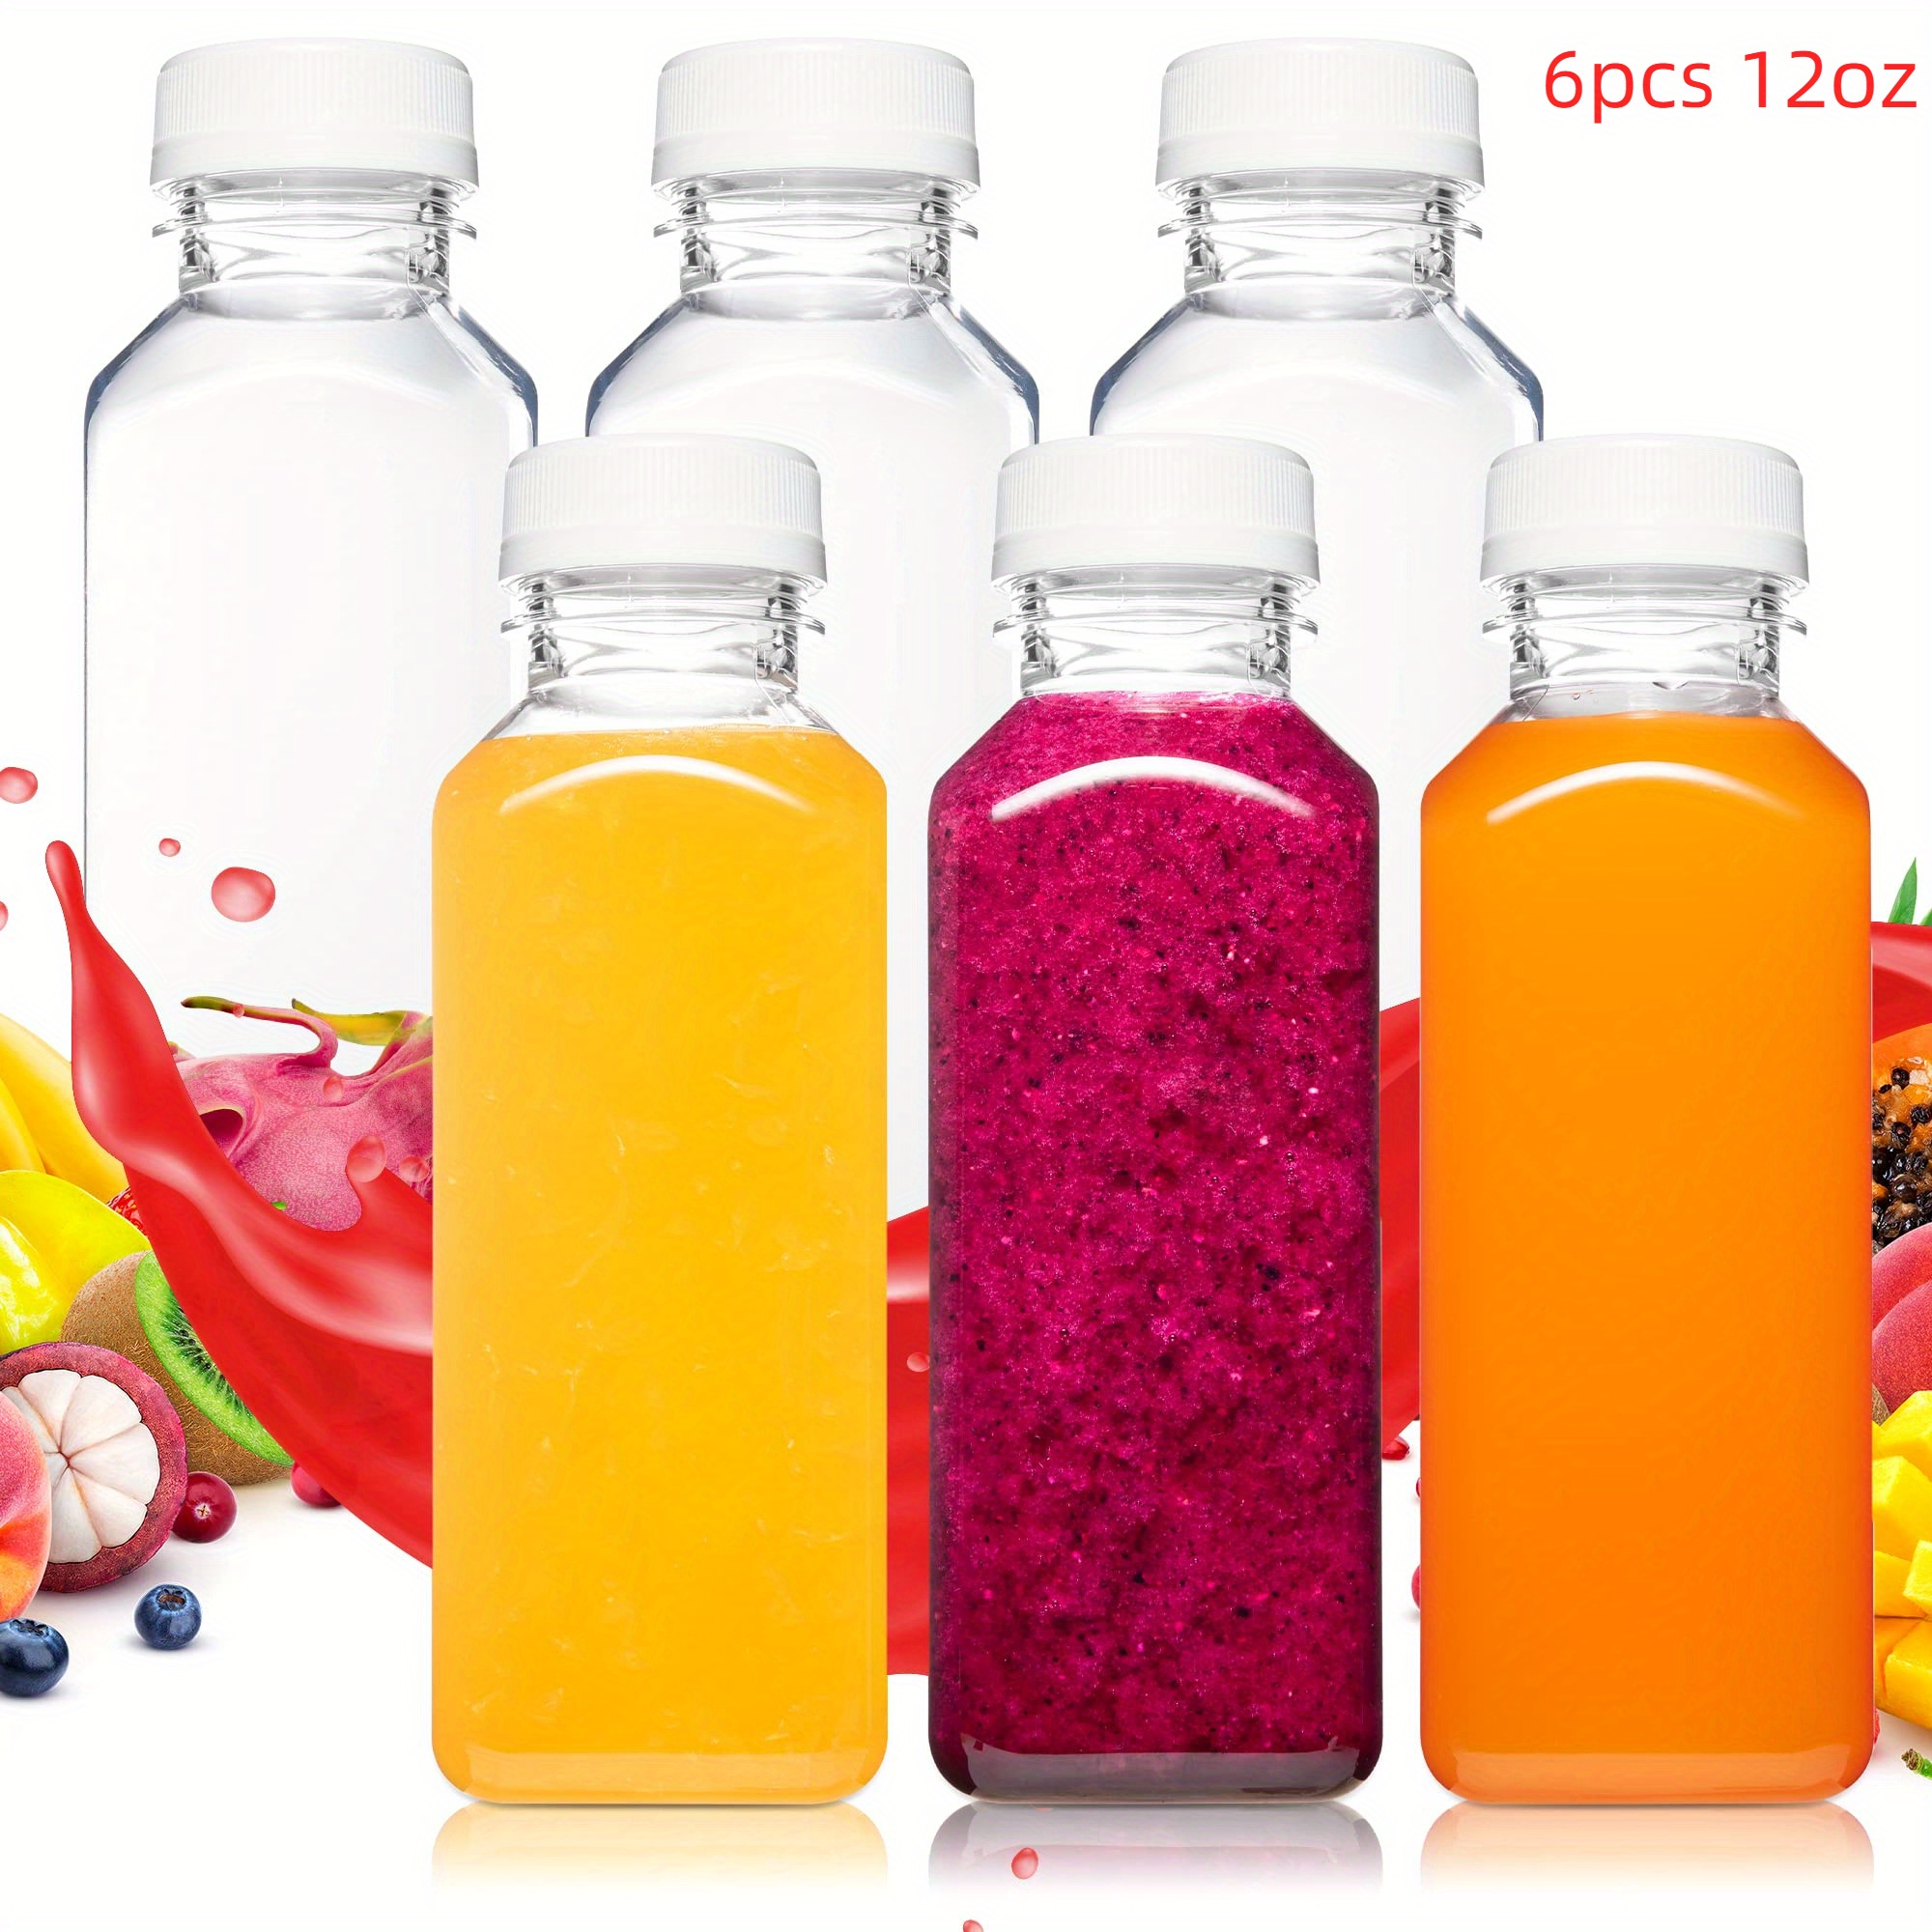 Plastic Juice Bottles with Lids, Juice Drink Containers with Caps